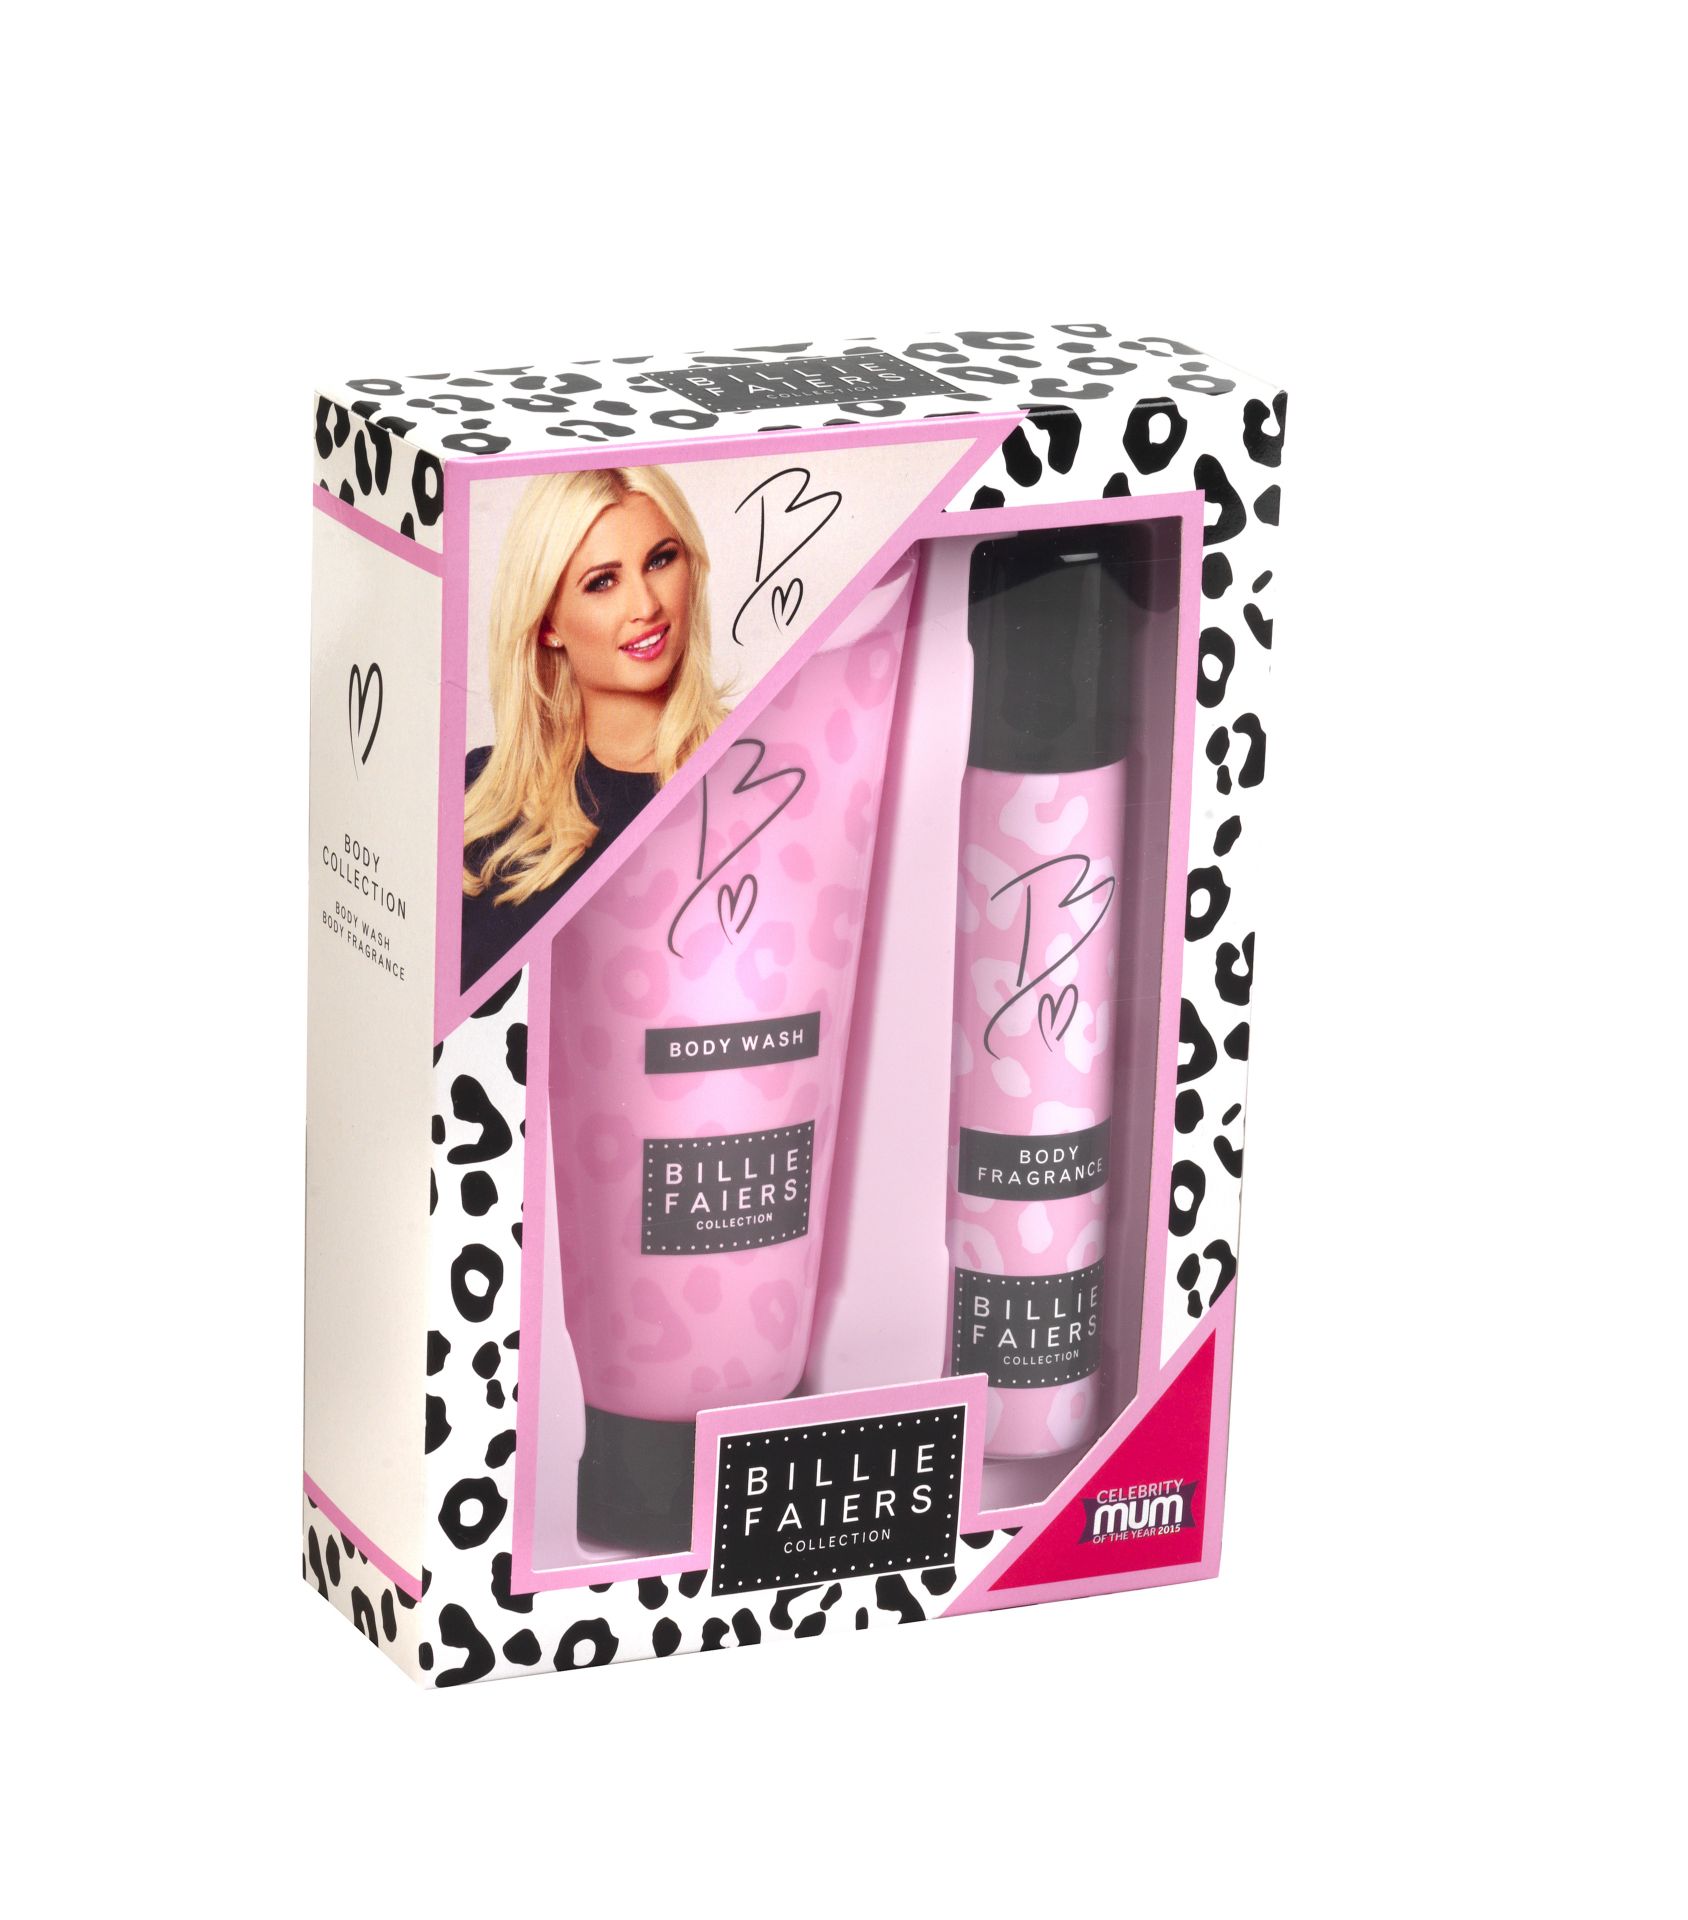 V Brand New Billie Faiers Body Collection With Body Wash And Body Fragrance X 2 Bid price to be